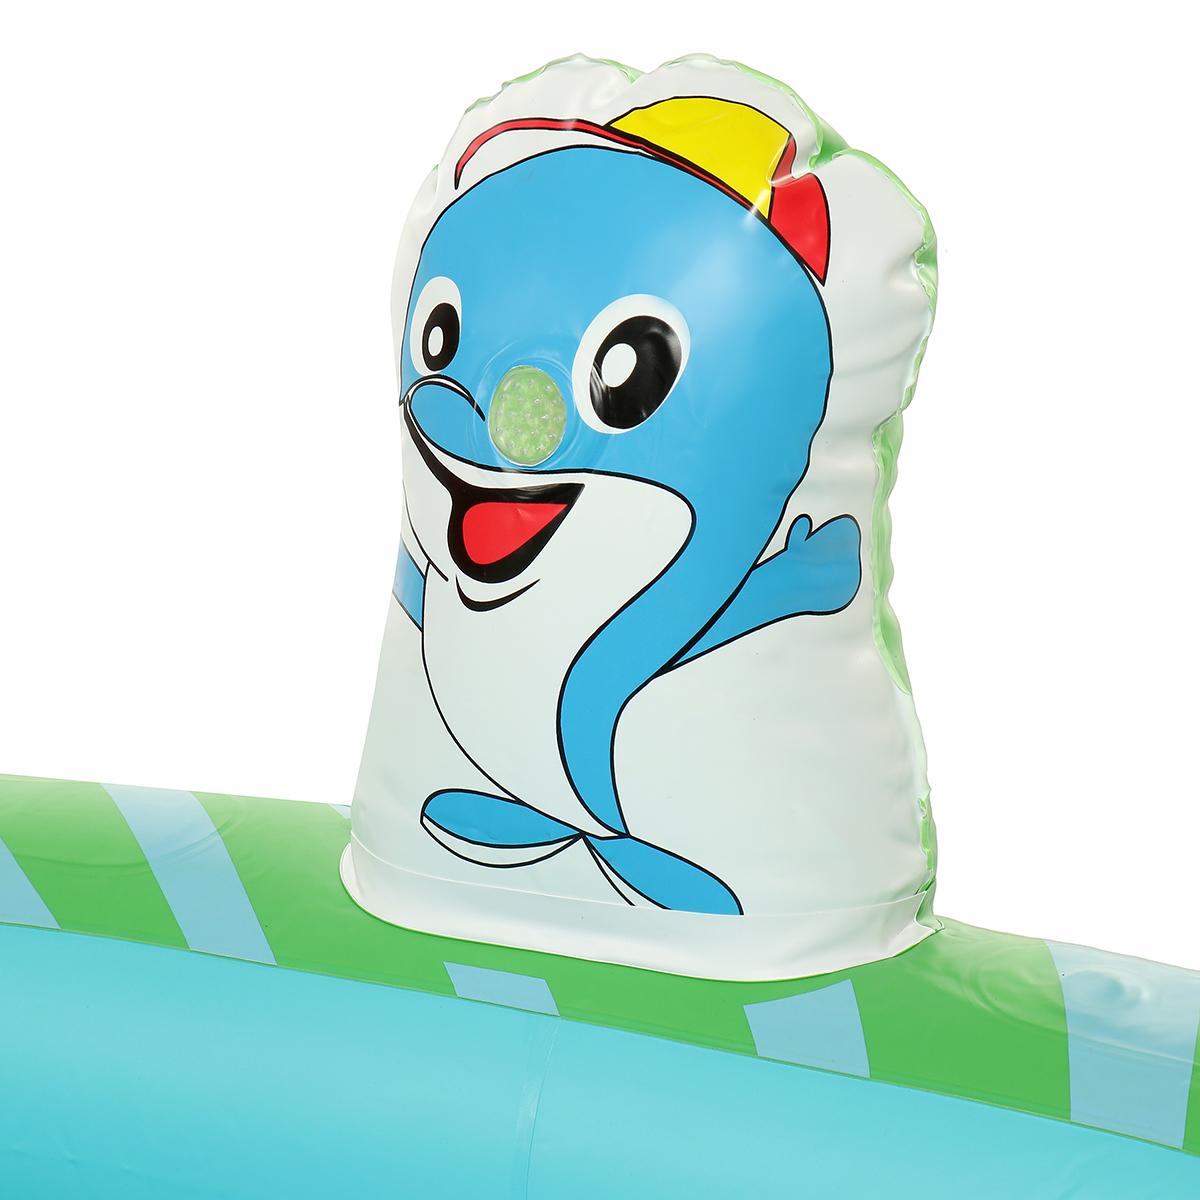 PVC-Children-Inflatable-Swimming-Pool-Sprinkler-Pool-Thickened-Cartoon-Pattern-Outdoor-Swimming-Wate-1851764-17